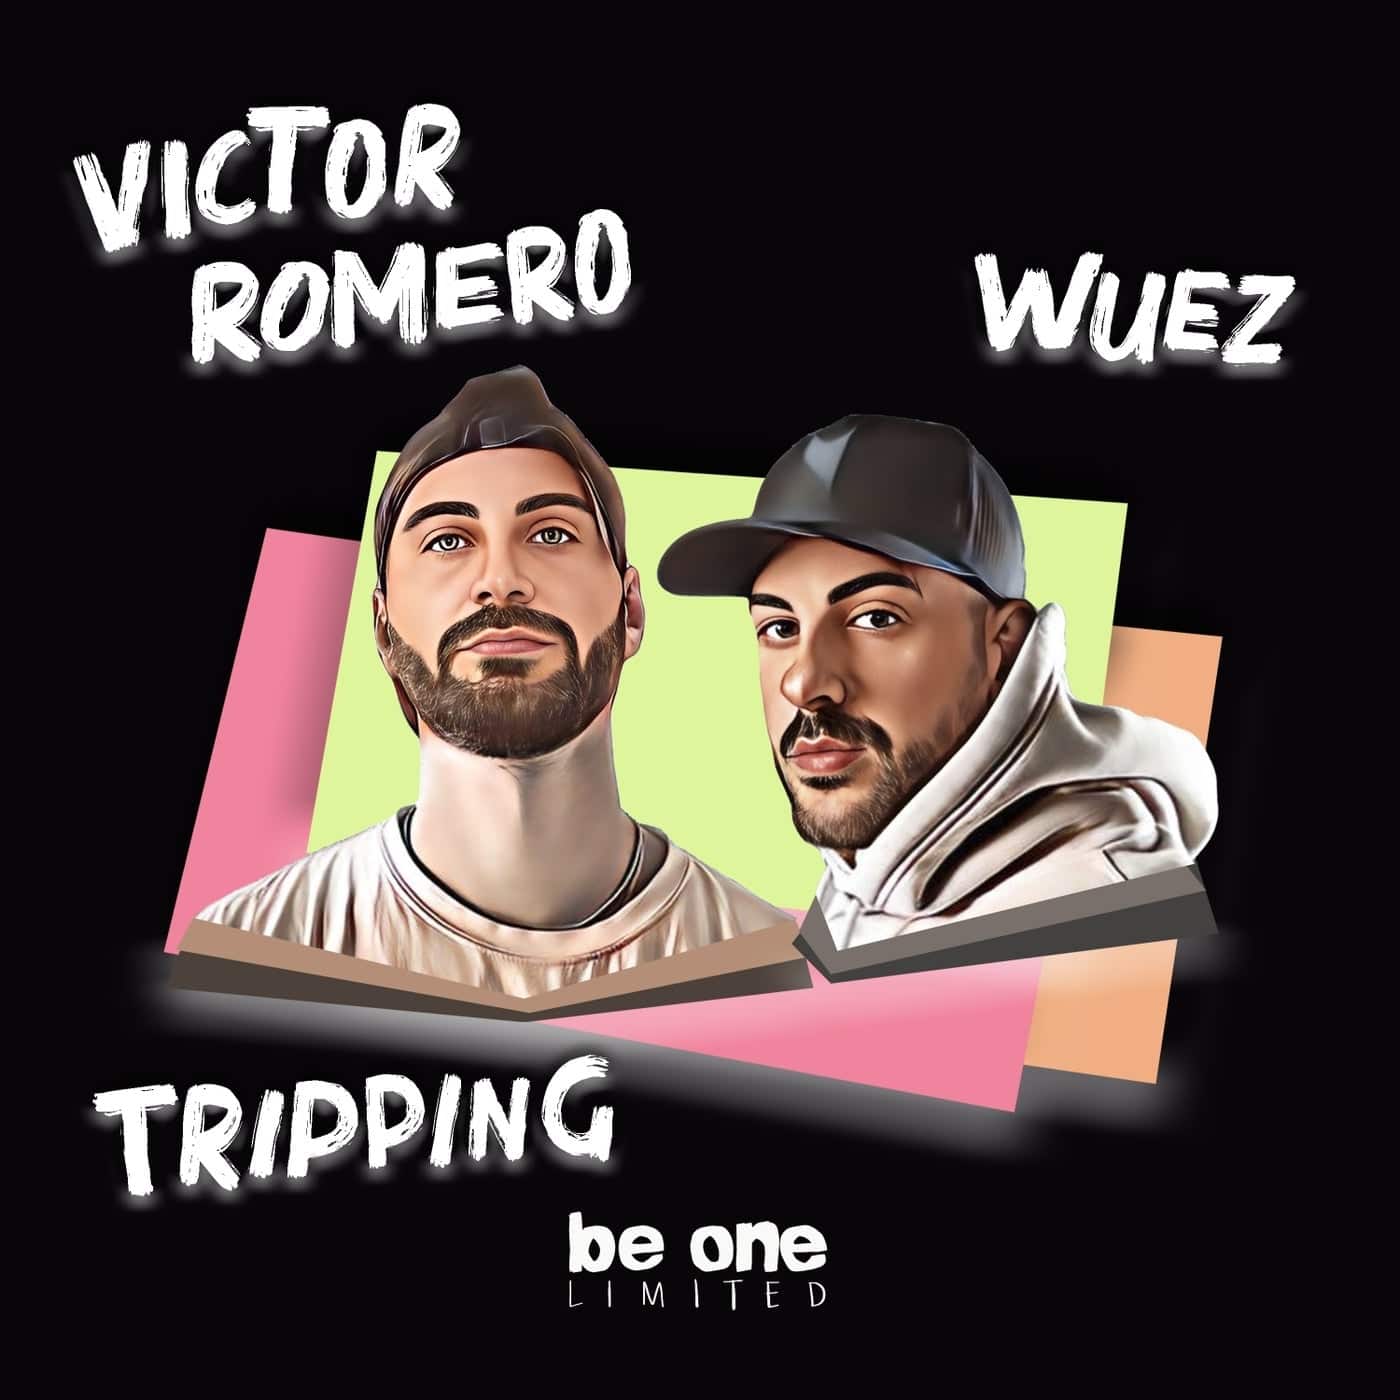 image cover: Tripping by Victor Romero, Wuez on Be One Limited